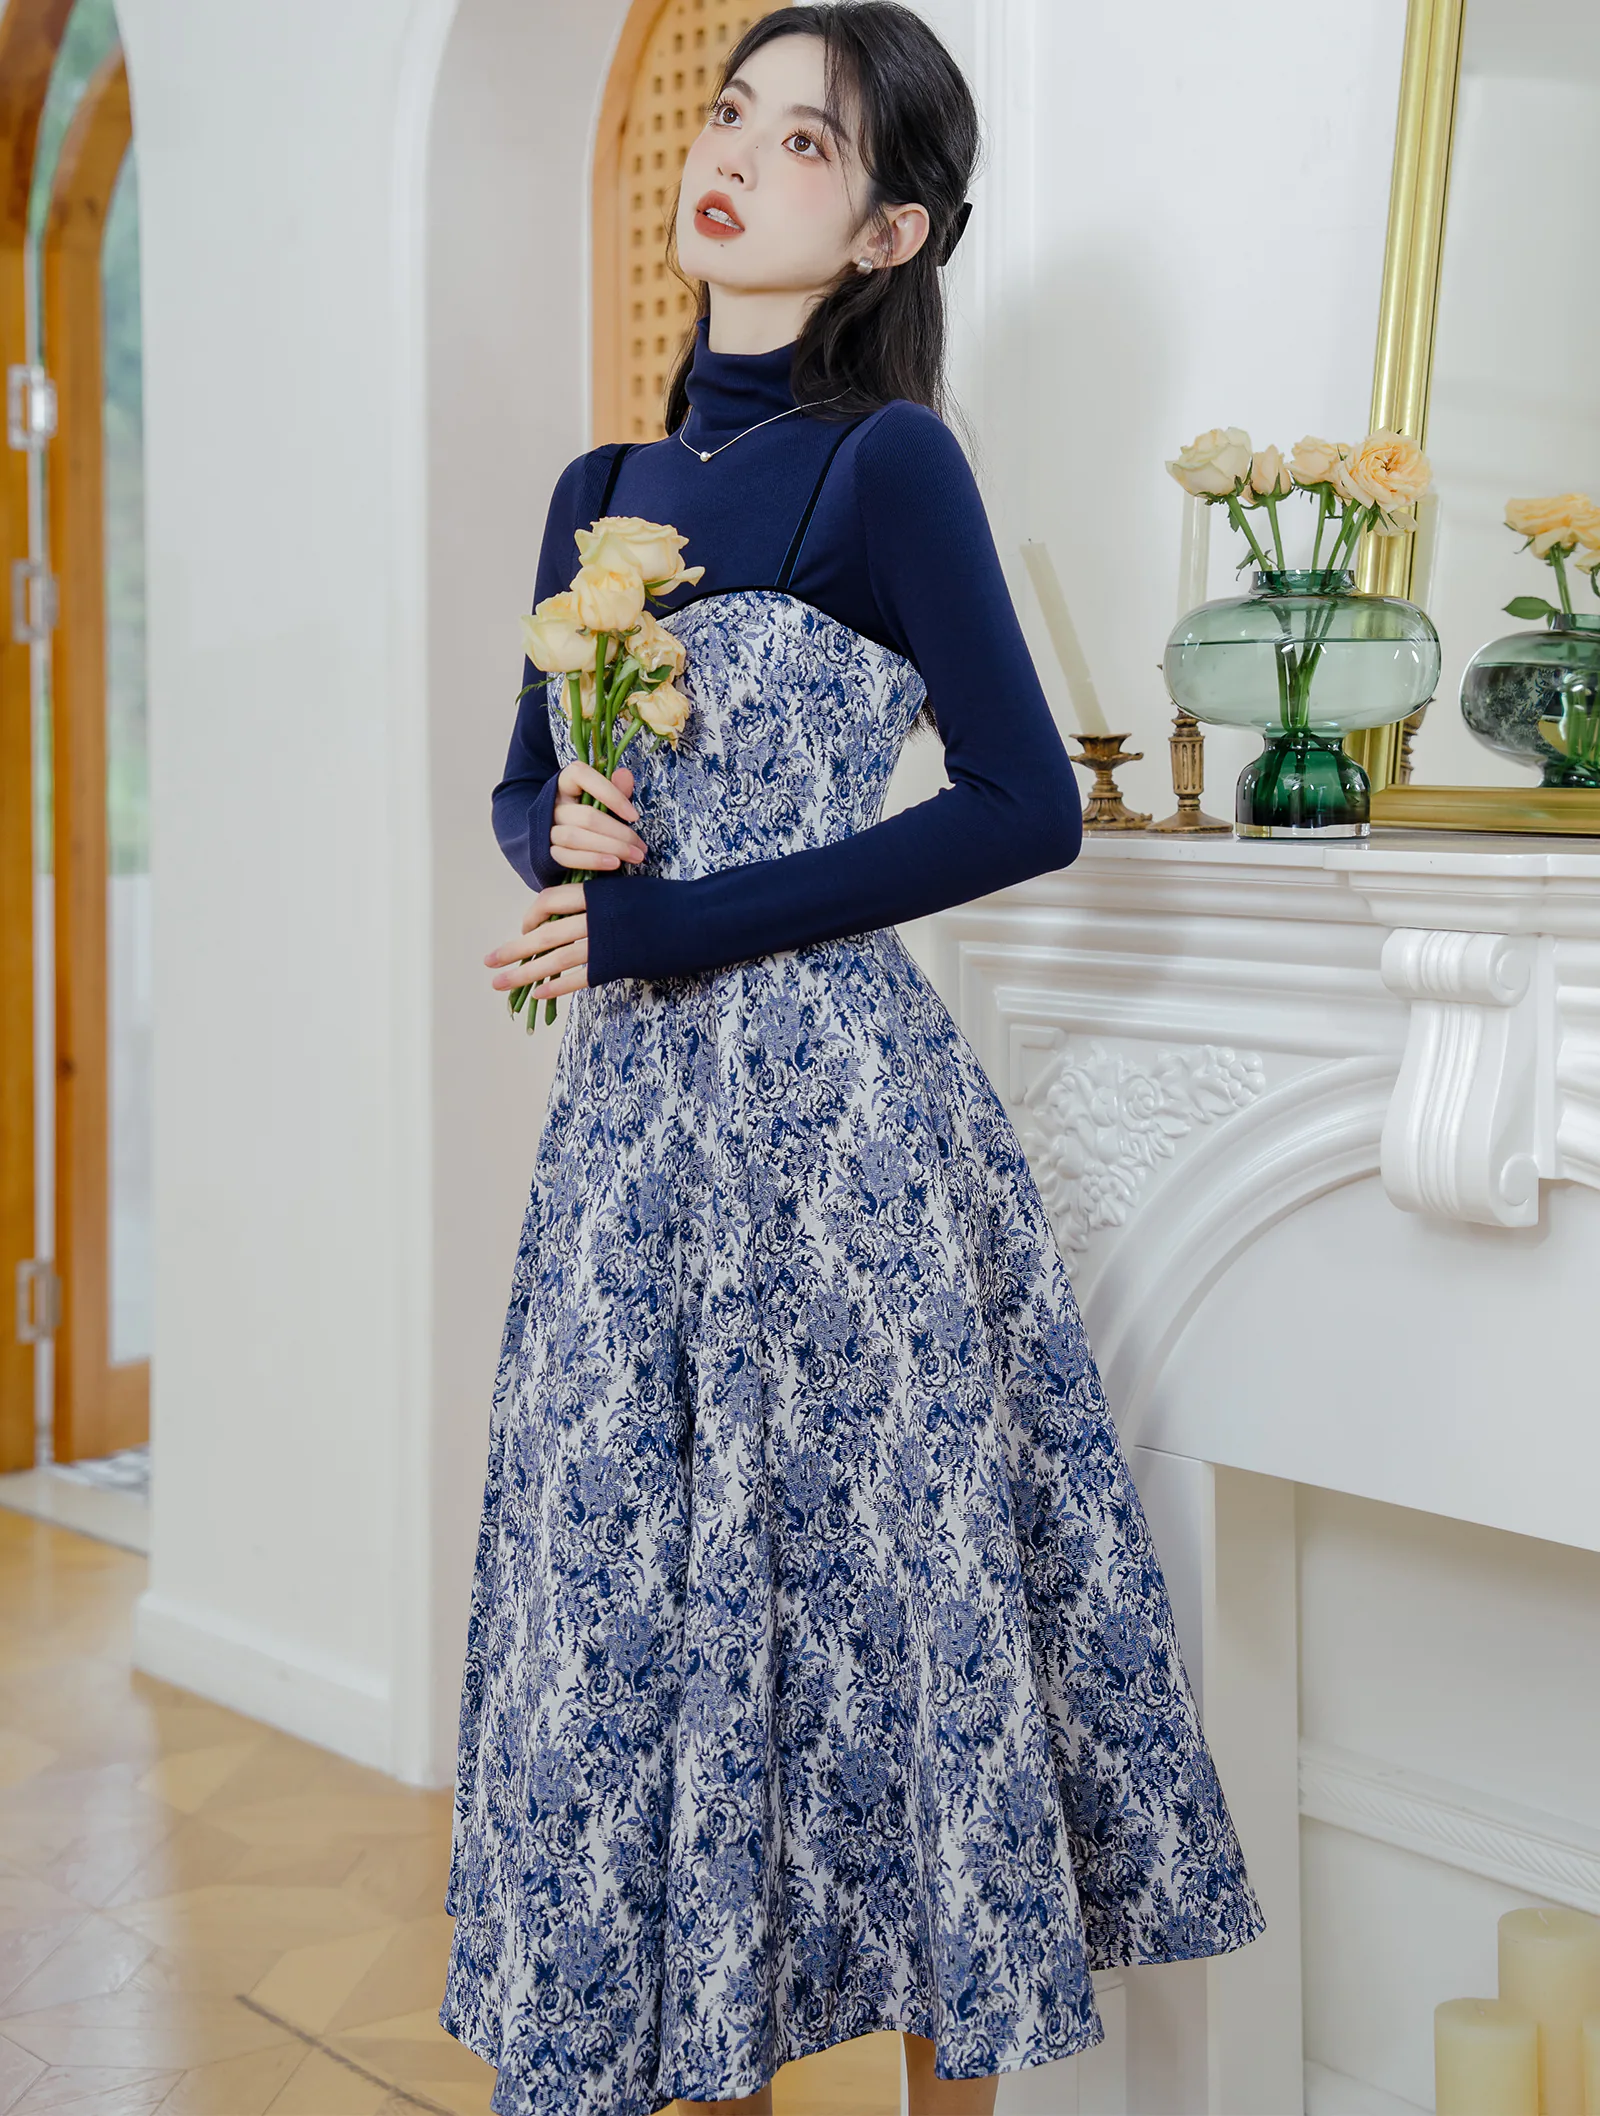 Sweet Blue Turtleneck Knit Sweater with Thick Floral Slip Dress Suit04